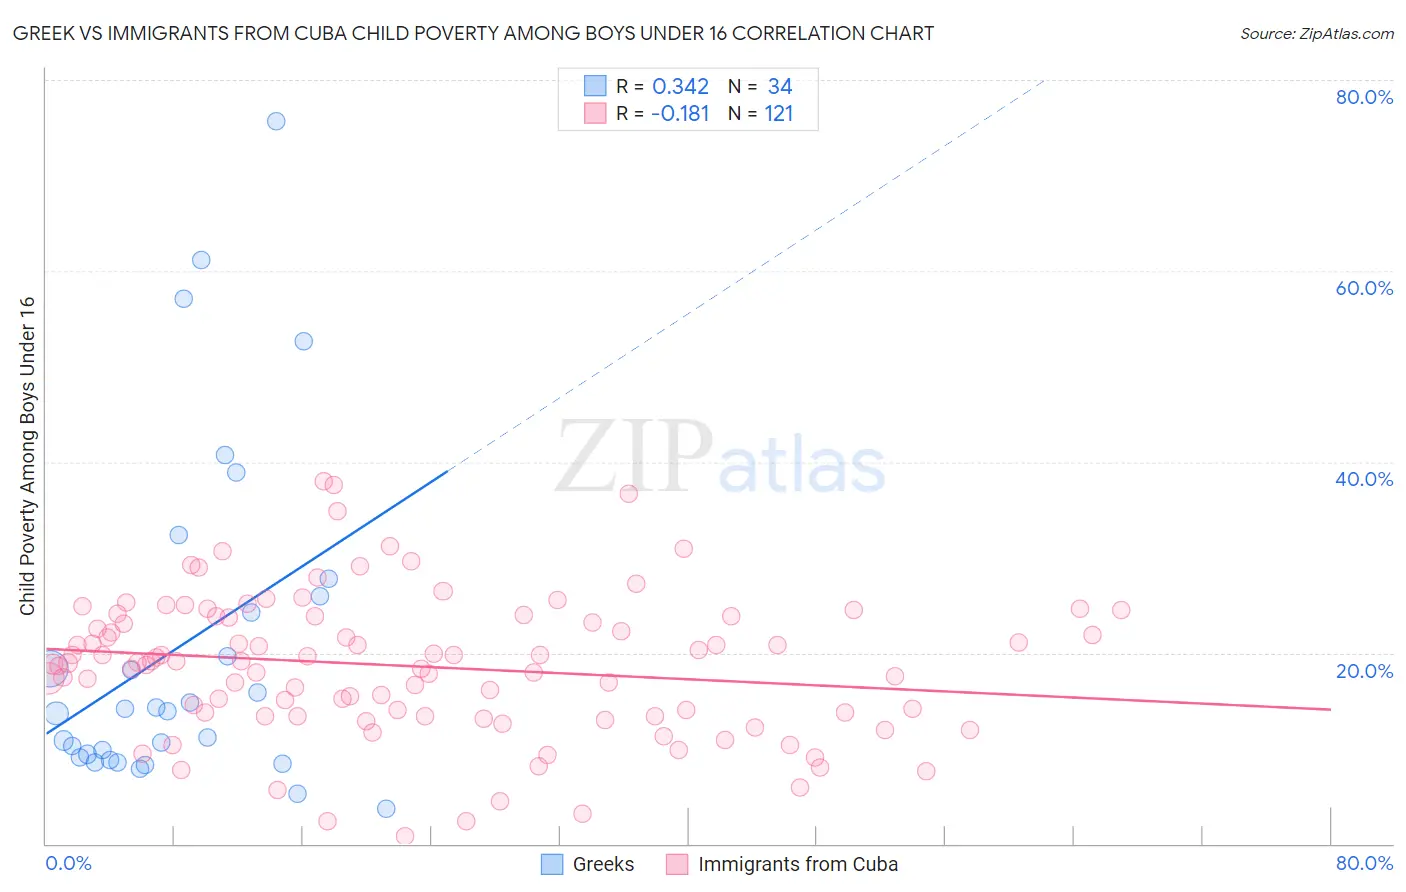 Greek vs Immigrants from Cuba Child Poverty Among Boys Under 16